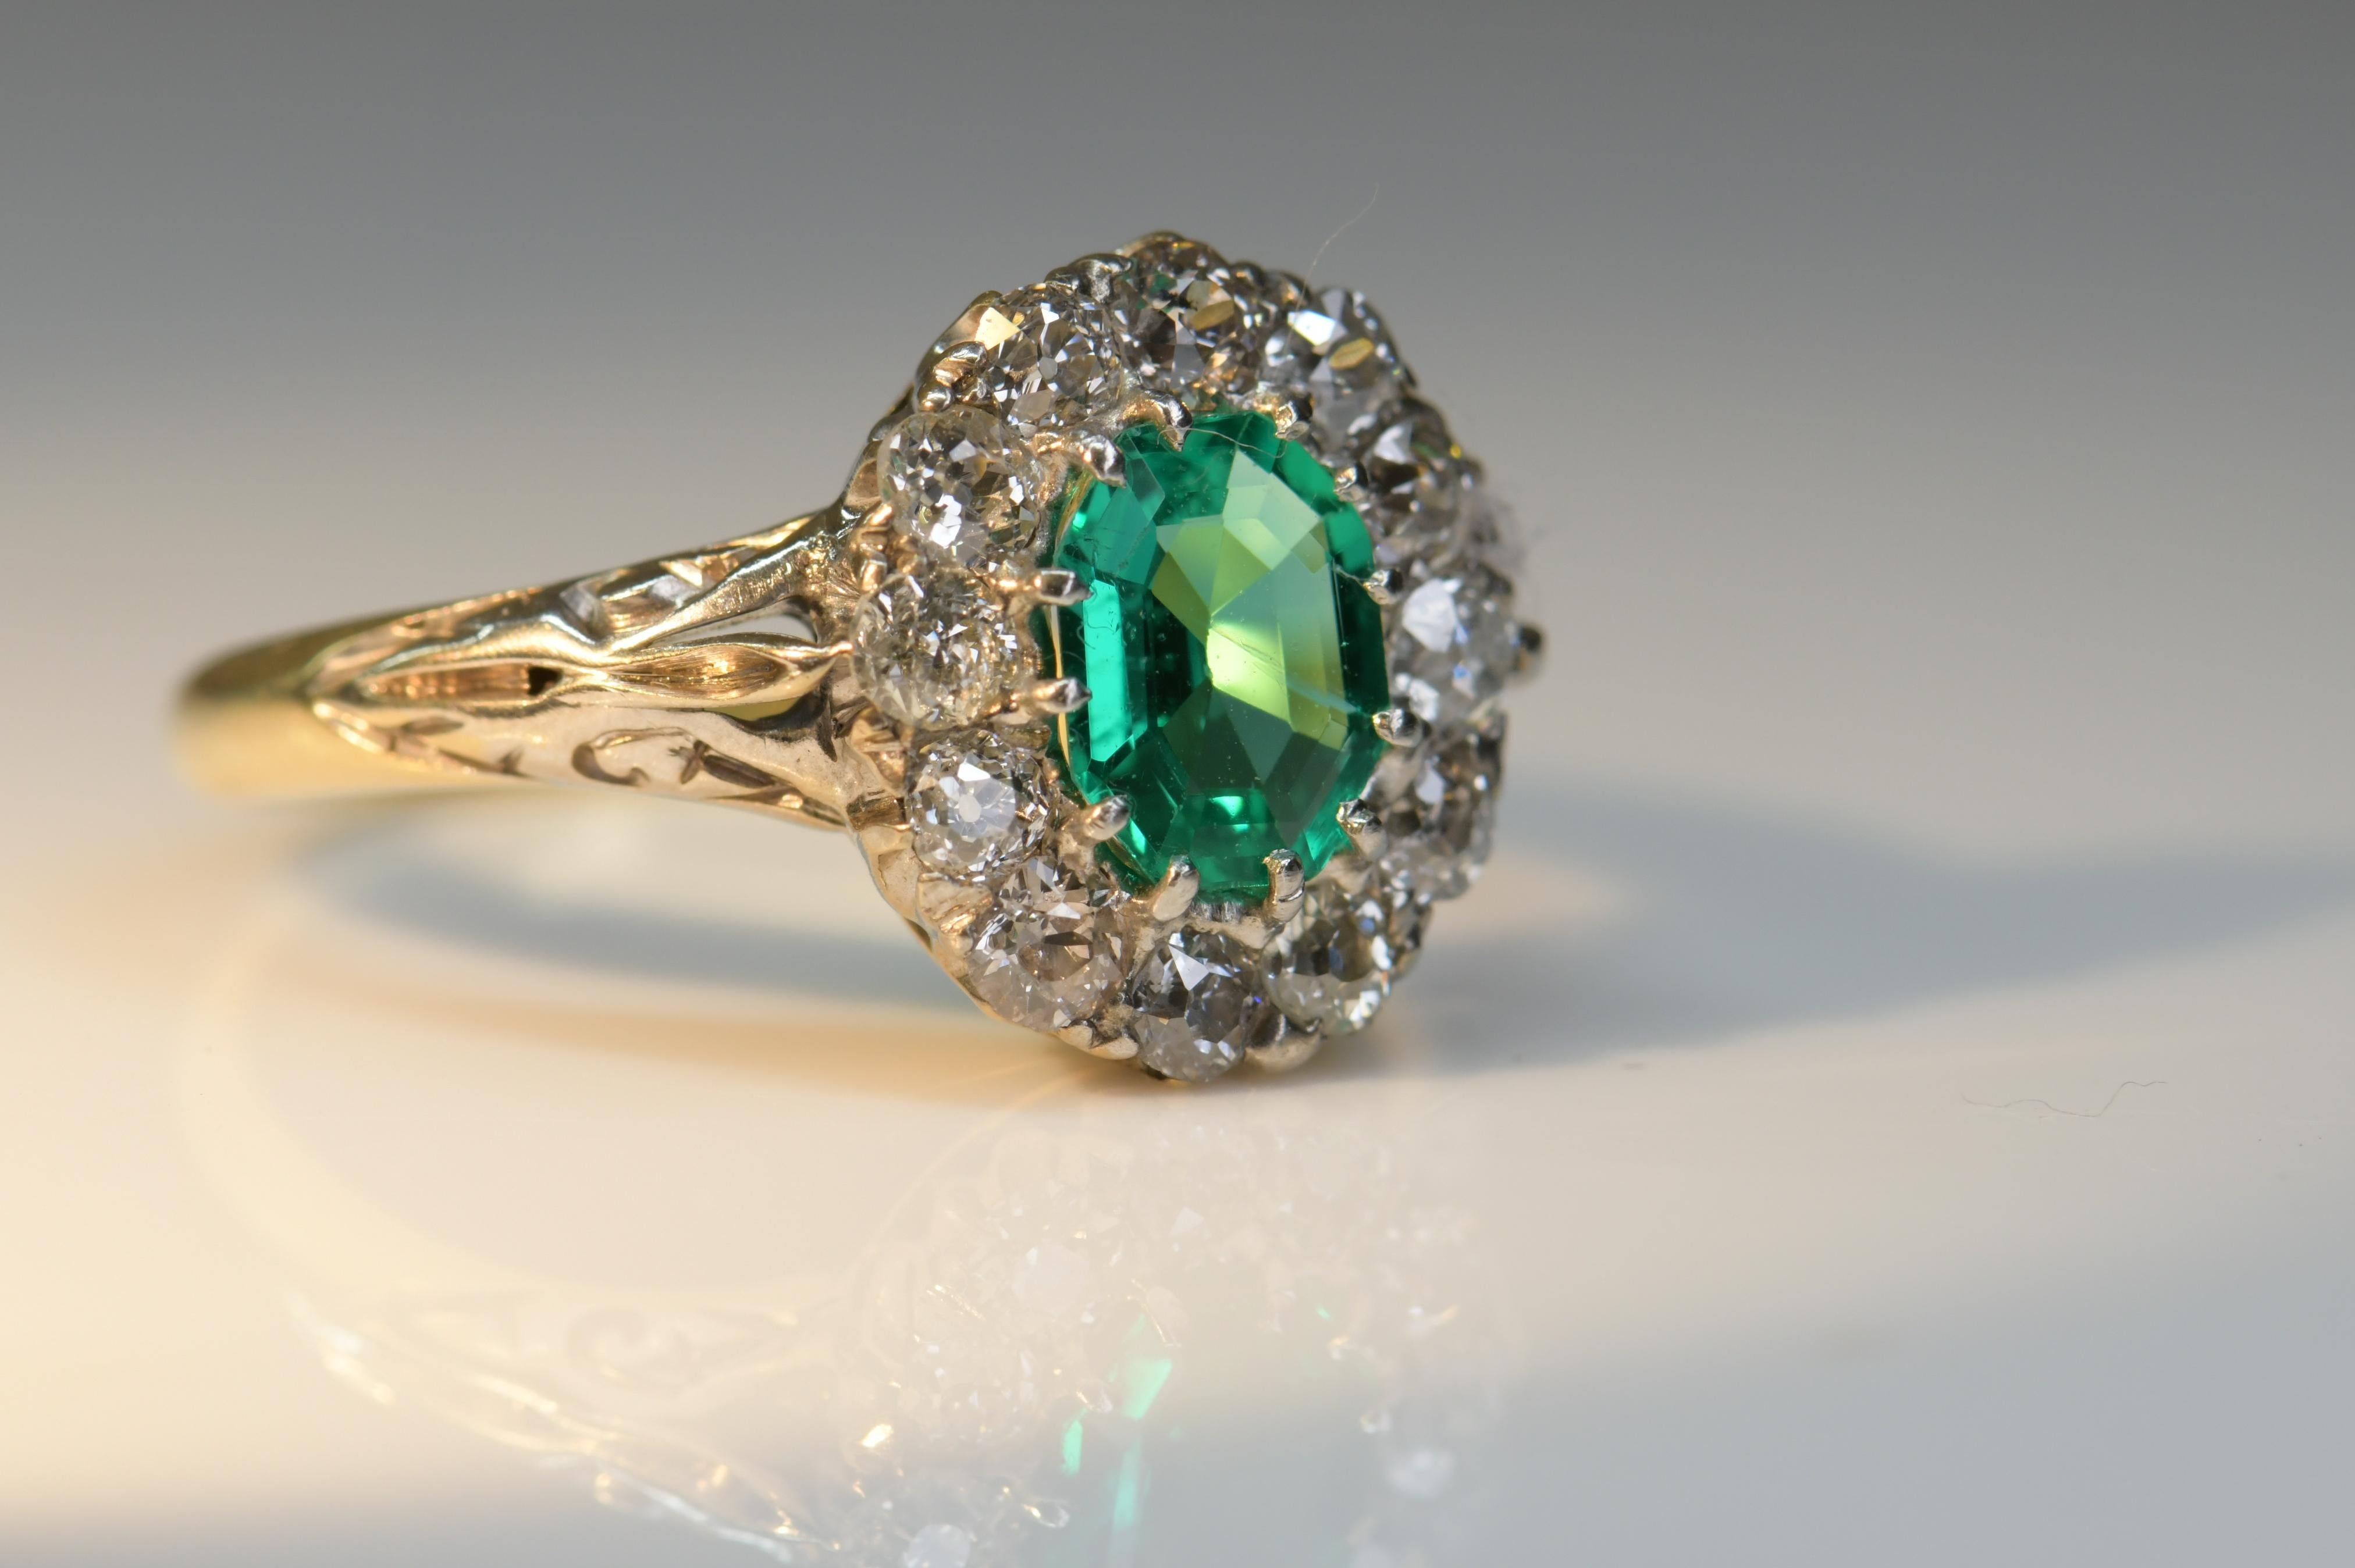 An impressive Victorian emerald and diamond cluster ring made in 1880 with very elegant scrolling decoration to the shoulders. The emerald is a top gem quality Columbian emerald, the stone is super clean which is very rare in emeralds, accompanied